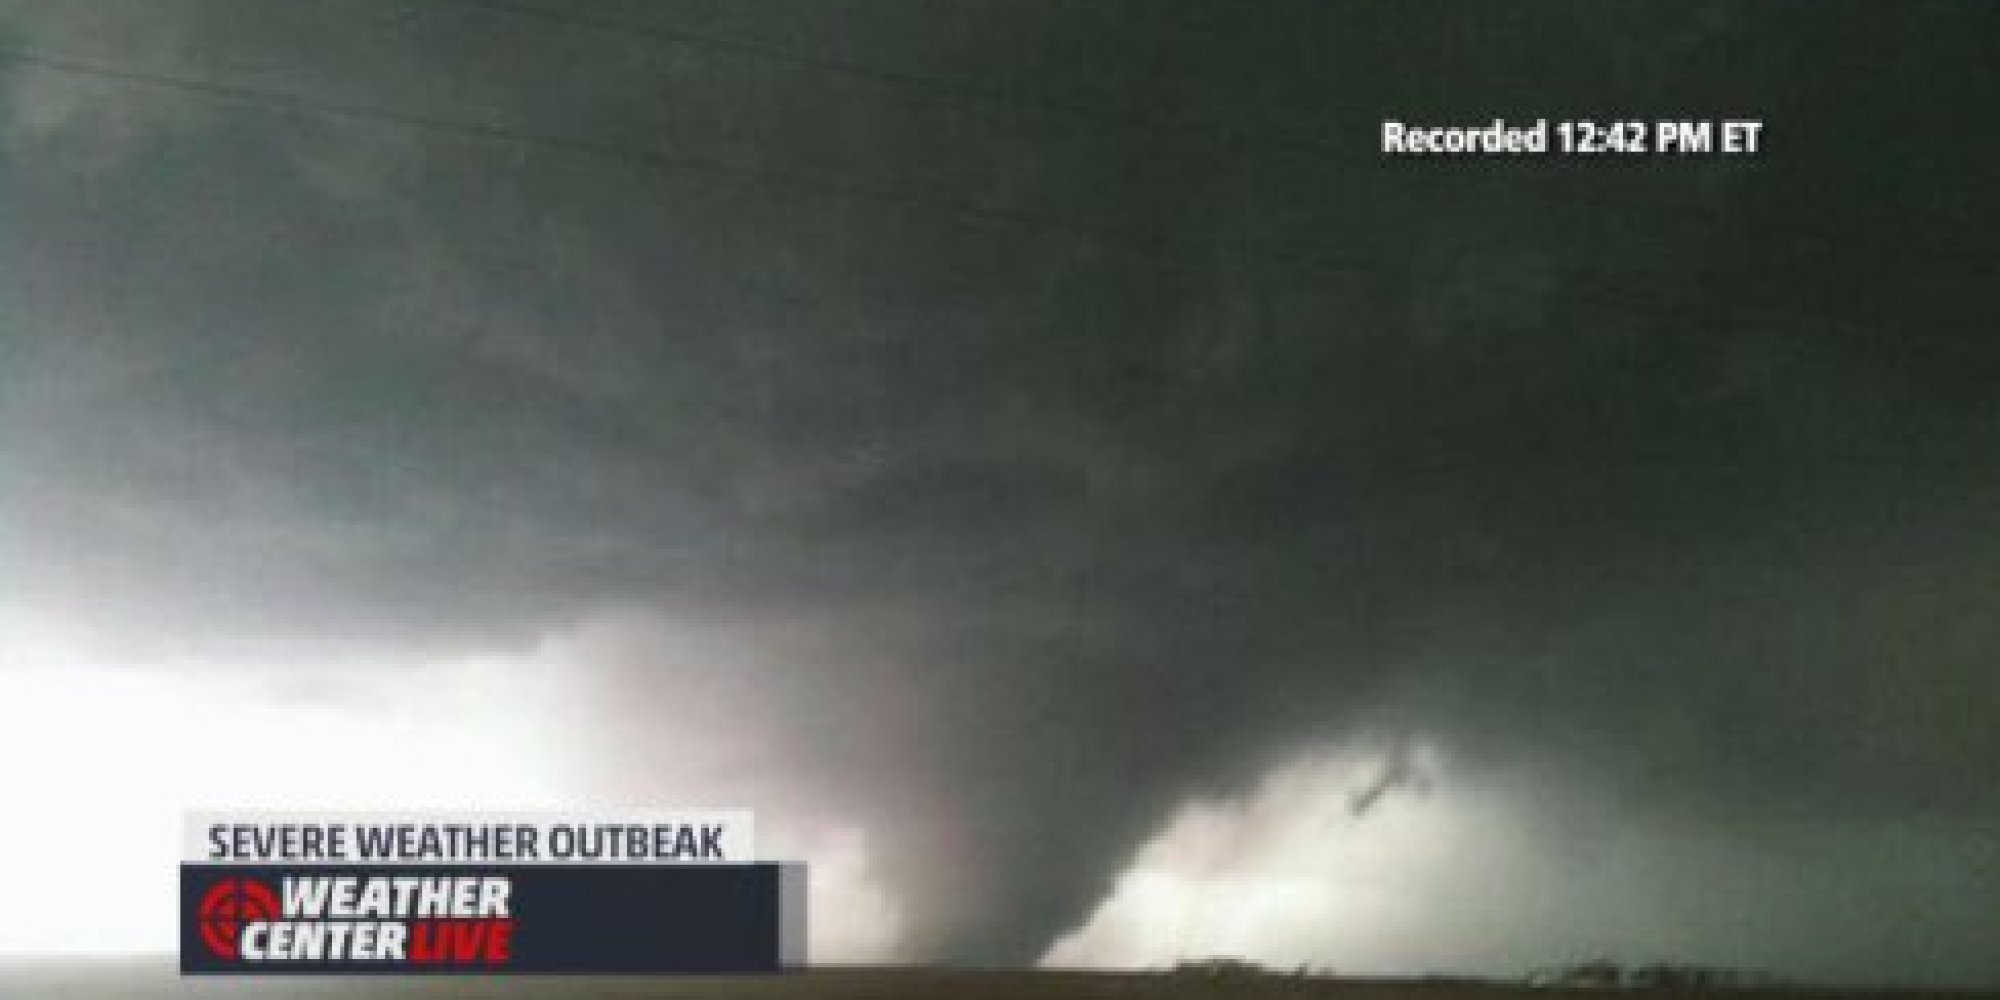 Tornados Level Homes In Illinois Towns Multiple Deaths Confirmed